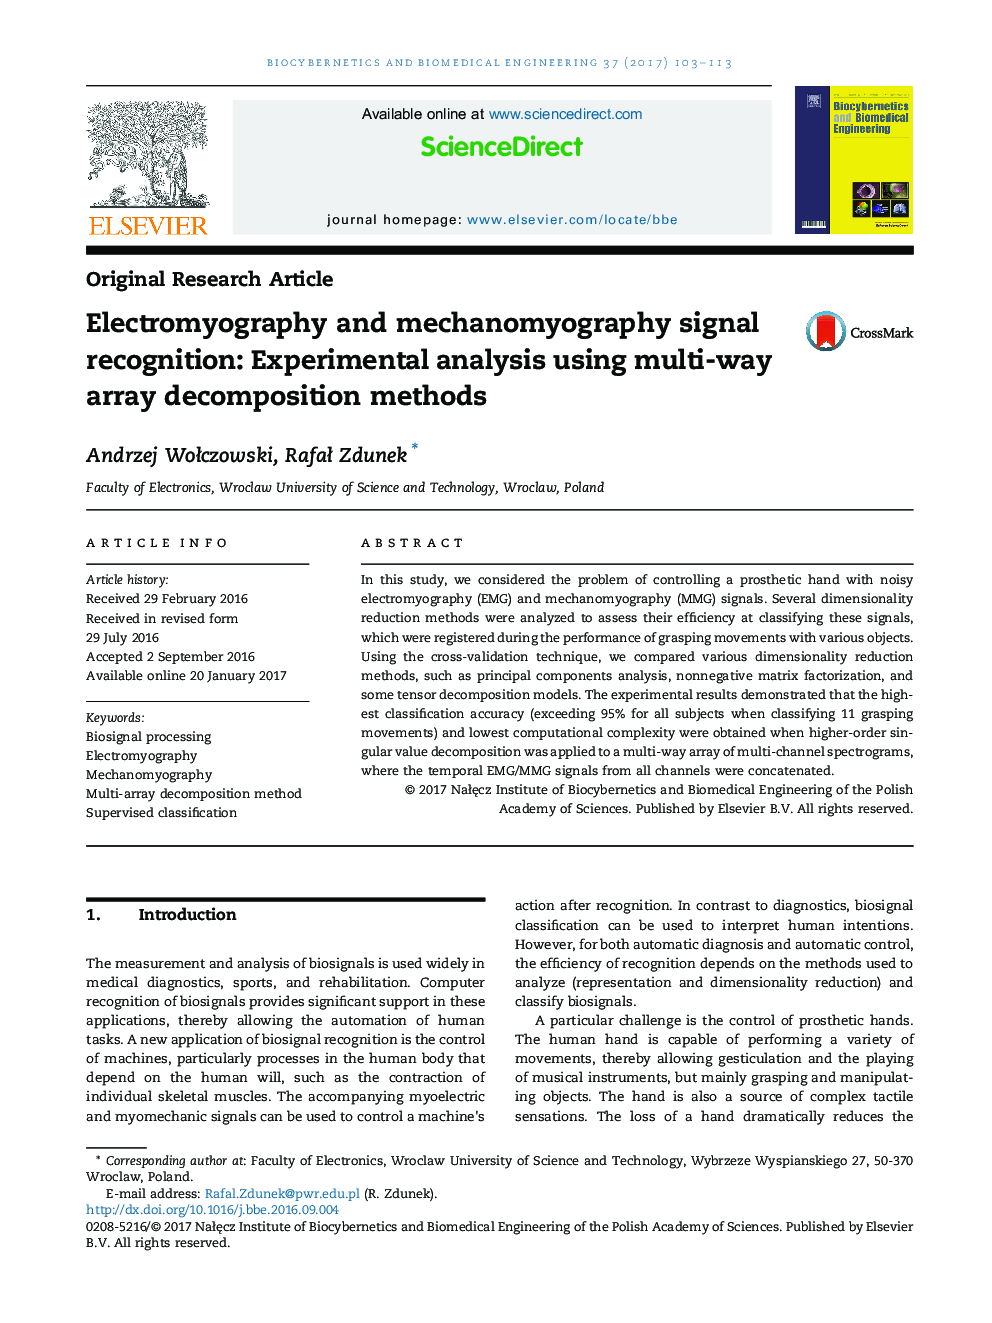 Electromyography and mechanomyography signal recognition: Experimental analysis using multi-way array decomposition methods